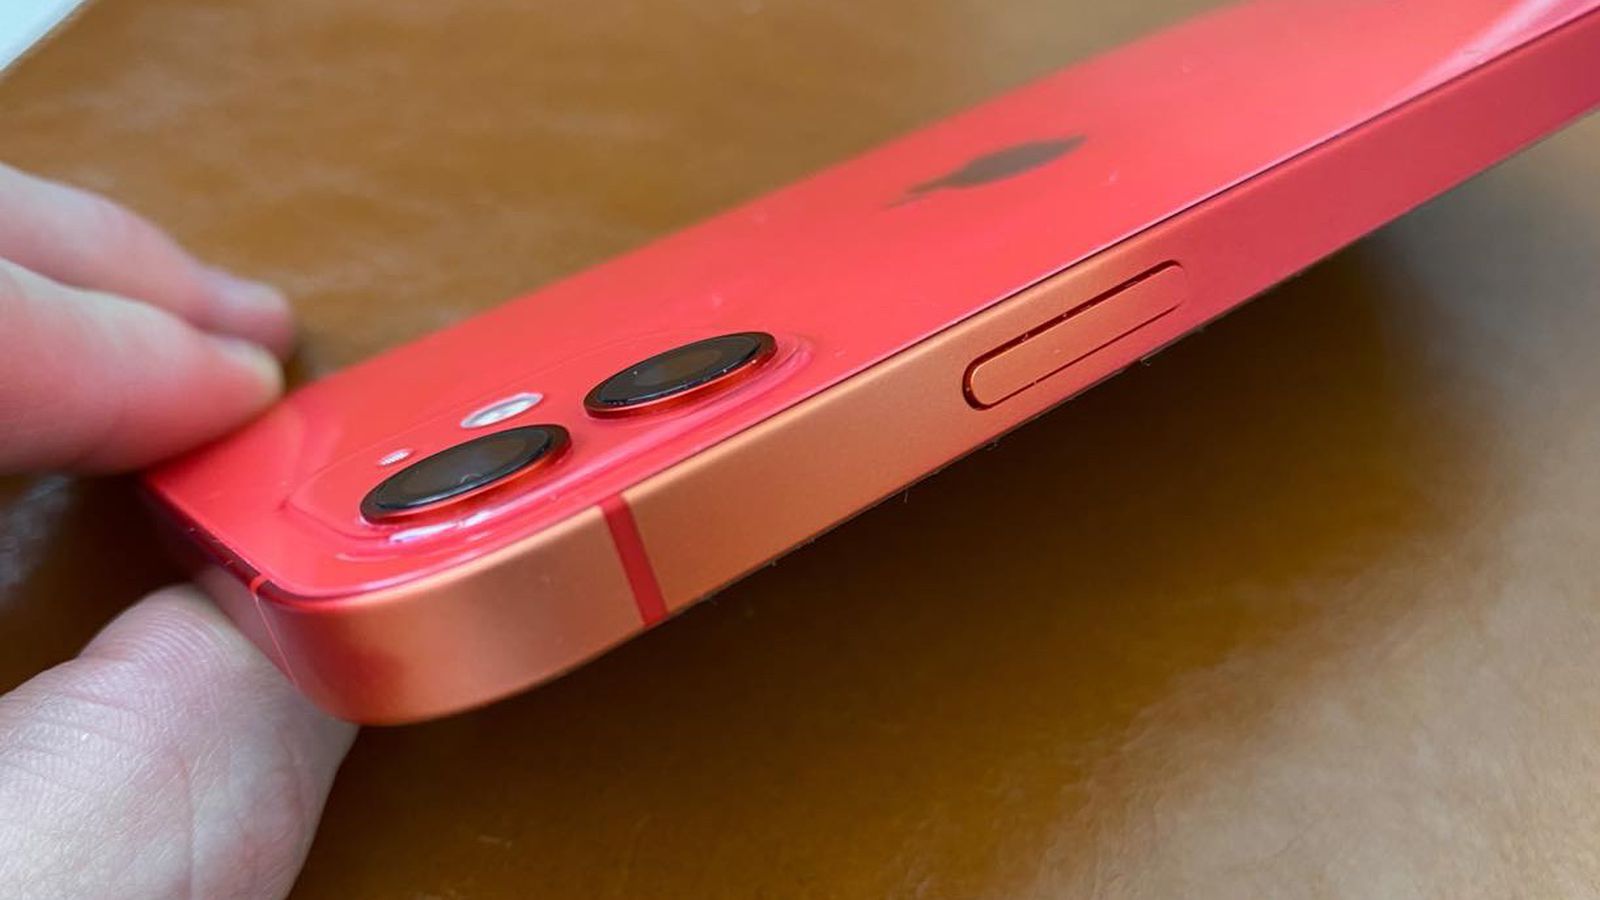 Some iPhone 11 and iPhone 12 models lose their aluminum body color